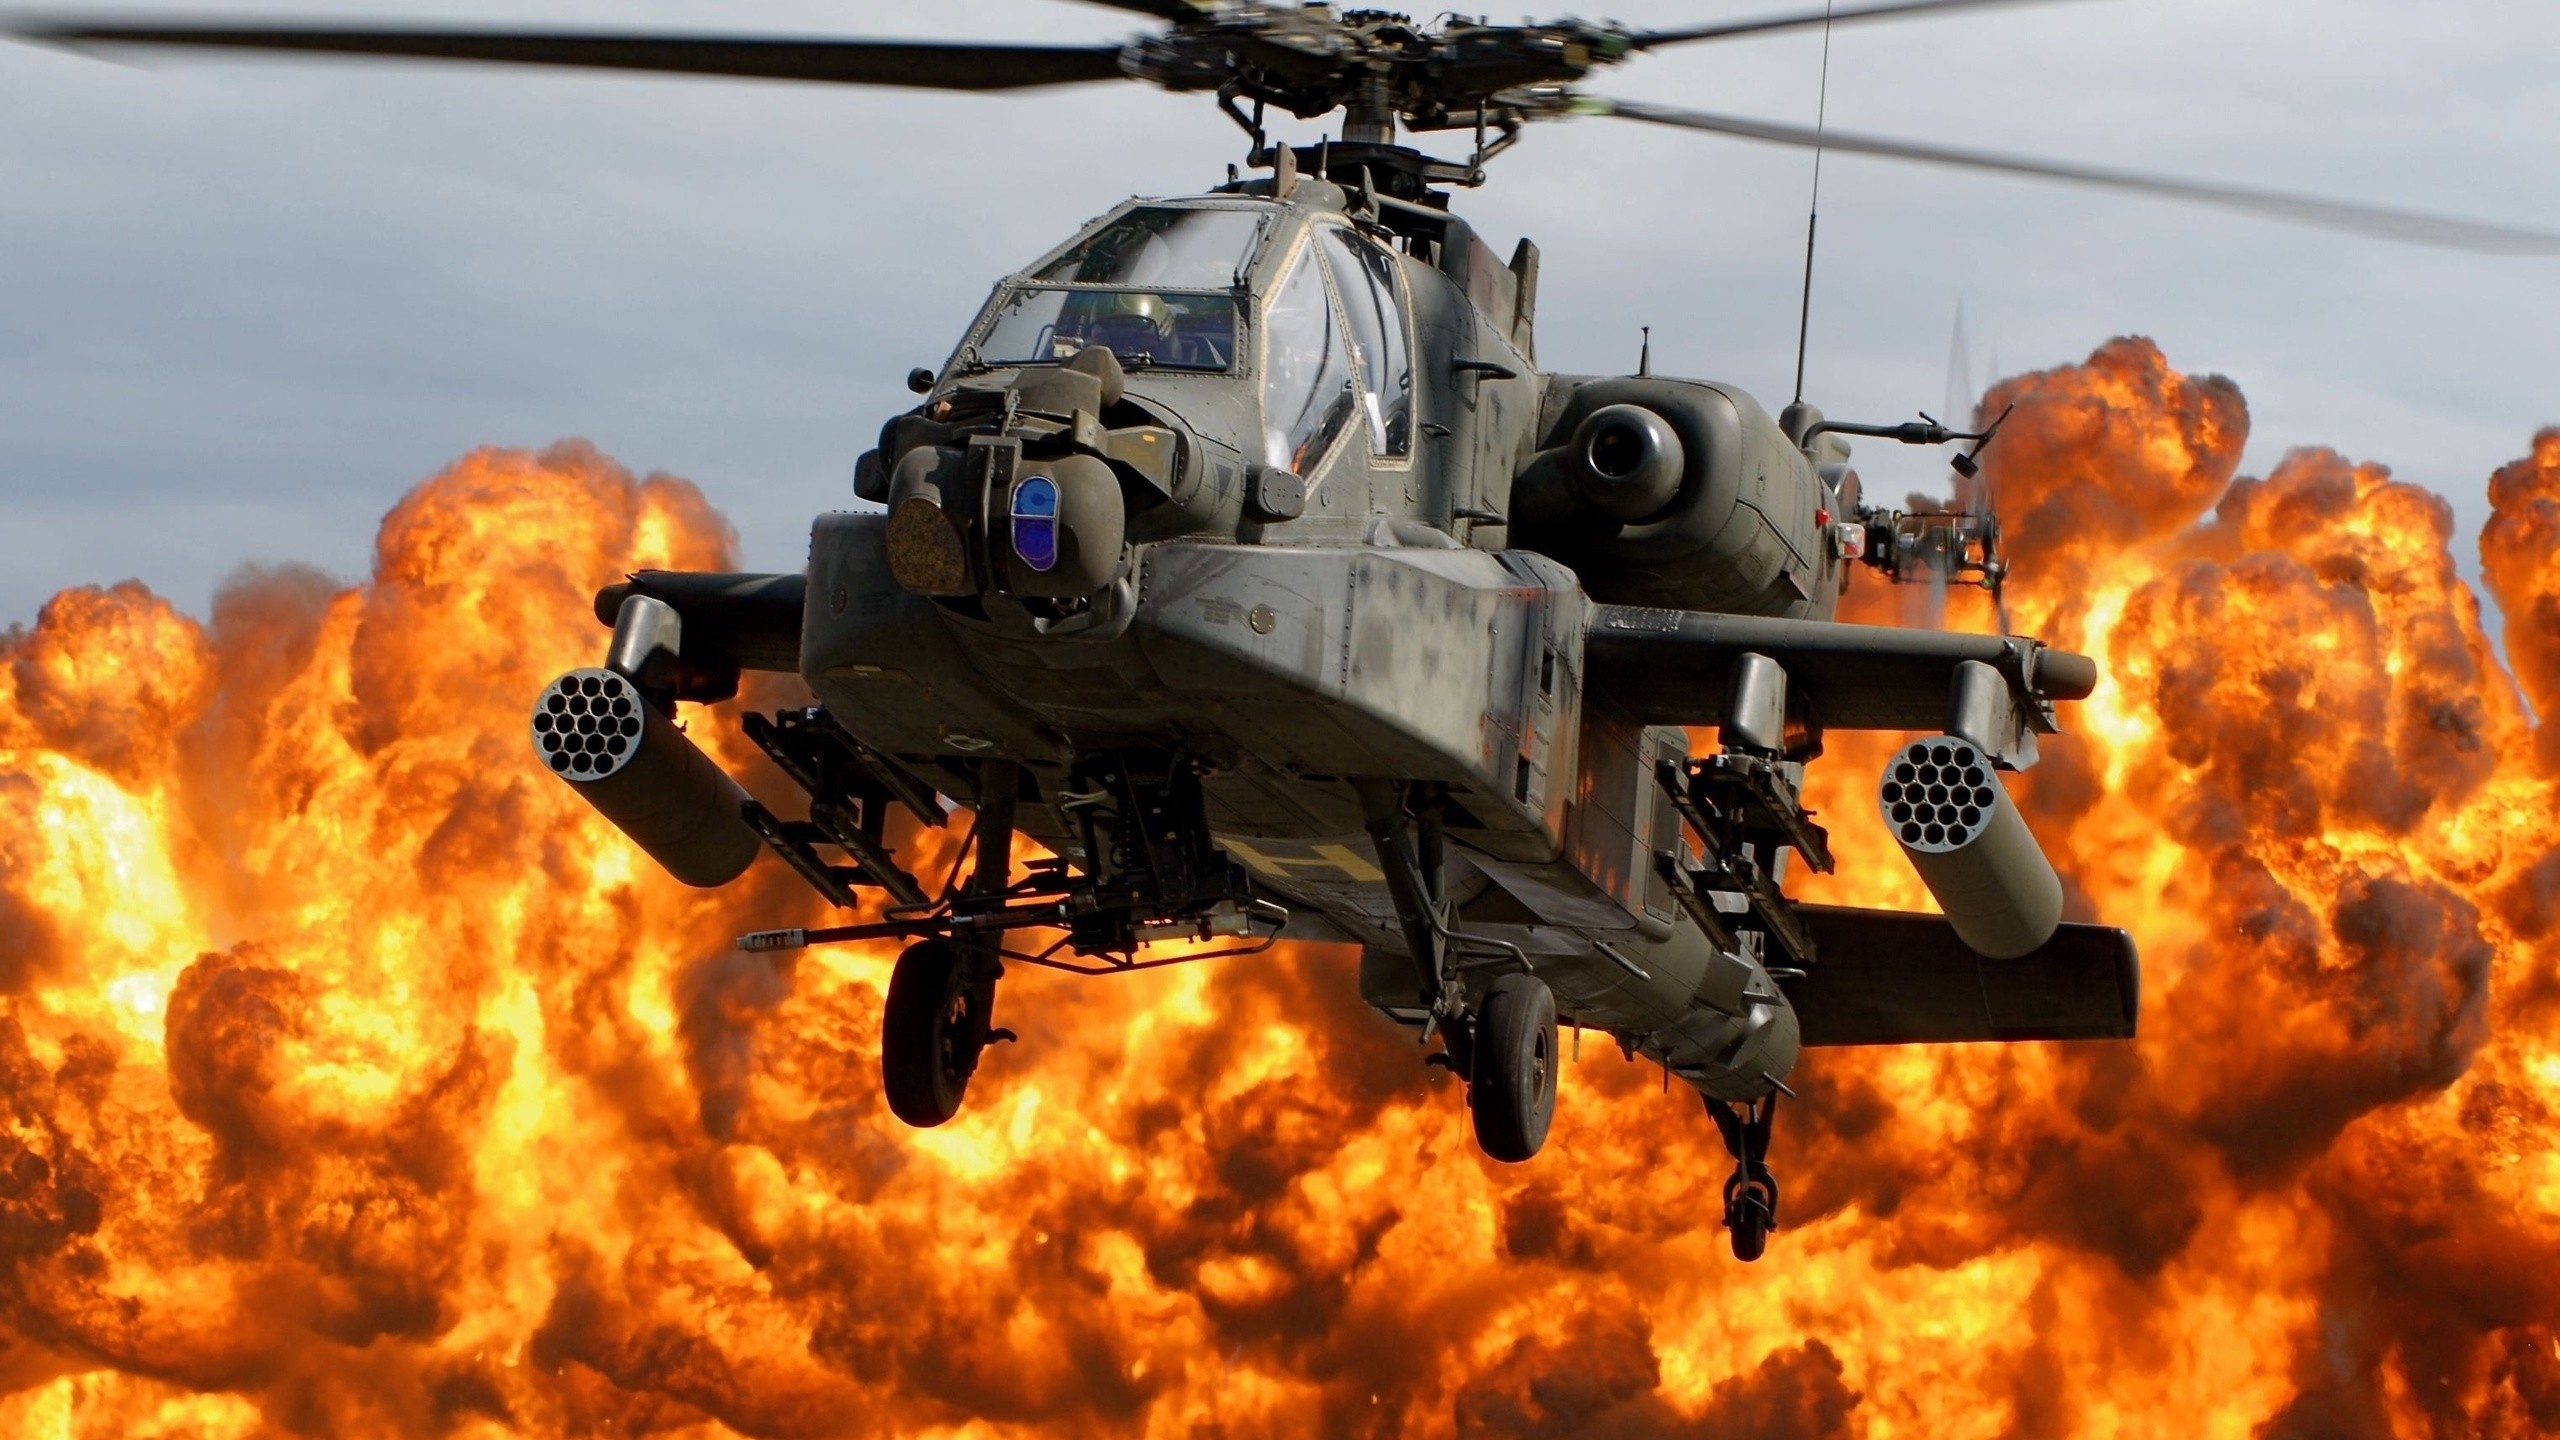 General 2560x1440 helicopters explosion vehicle military aircraft military vehicle Boeing AH-64 Apache United States Army American aircraft Boeing attack helicopters